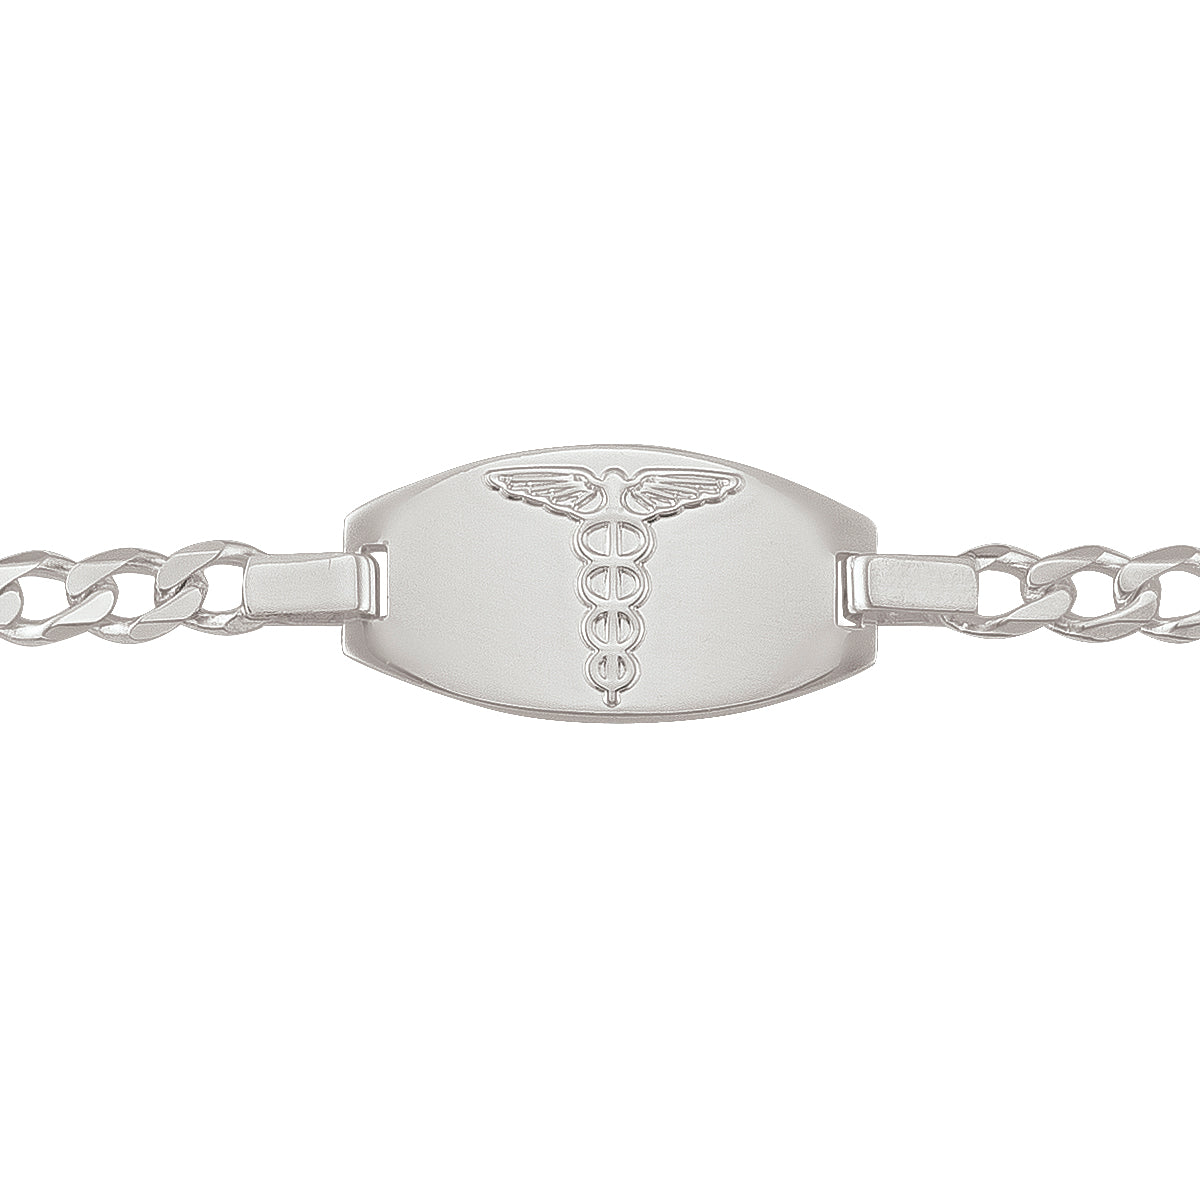 Buy Floral Butterfly Action Bracelet | American Medical ID